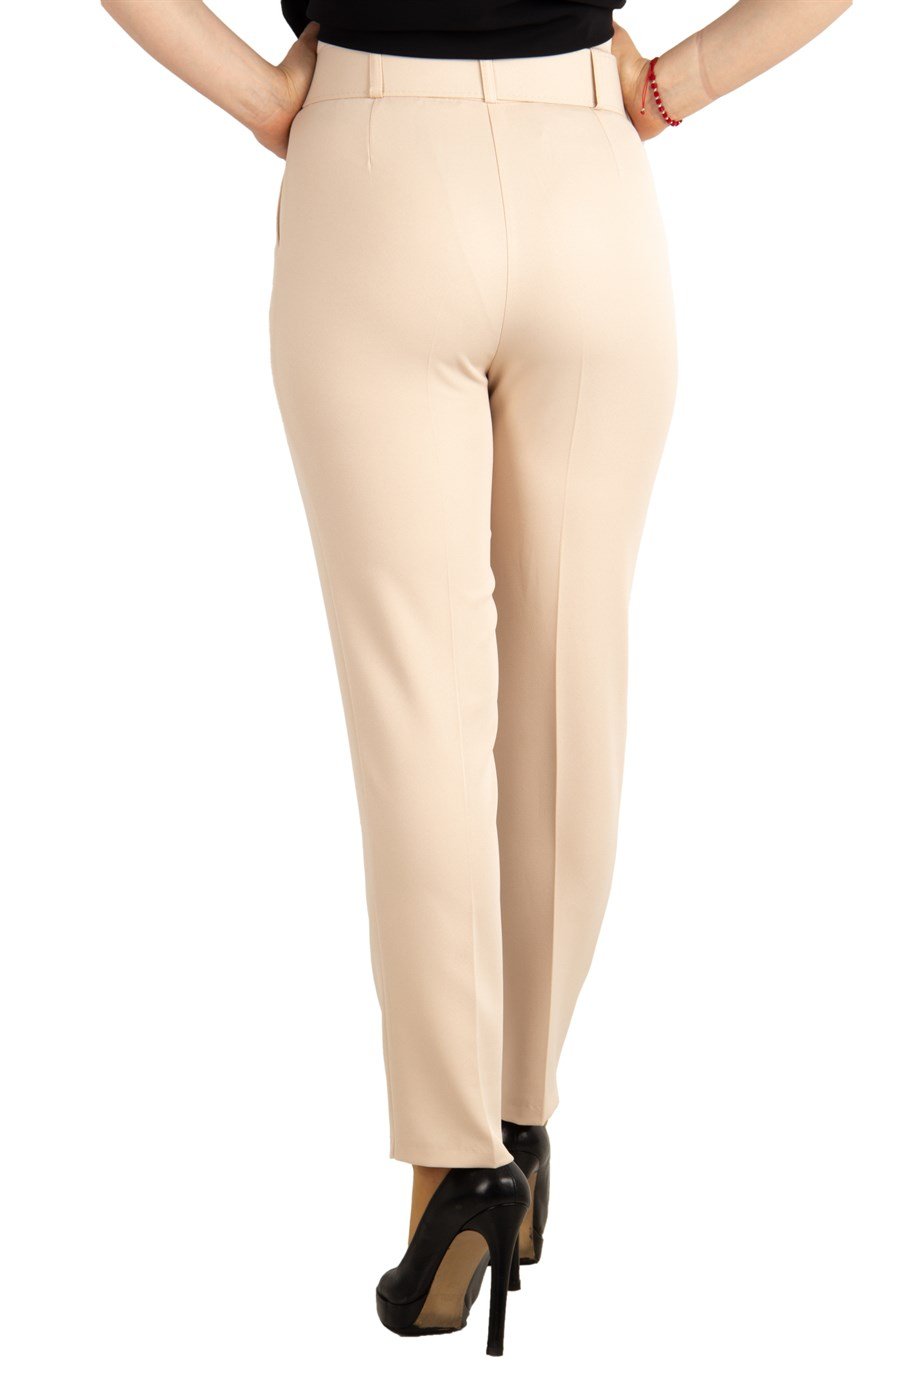 Trousers With Matching Belt Casual Formal Office Pants For Ladies - Cream - Wholesale  Womens Clothing Vendors For Boutiques